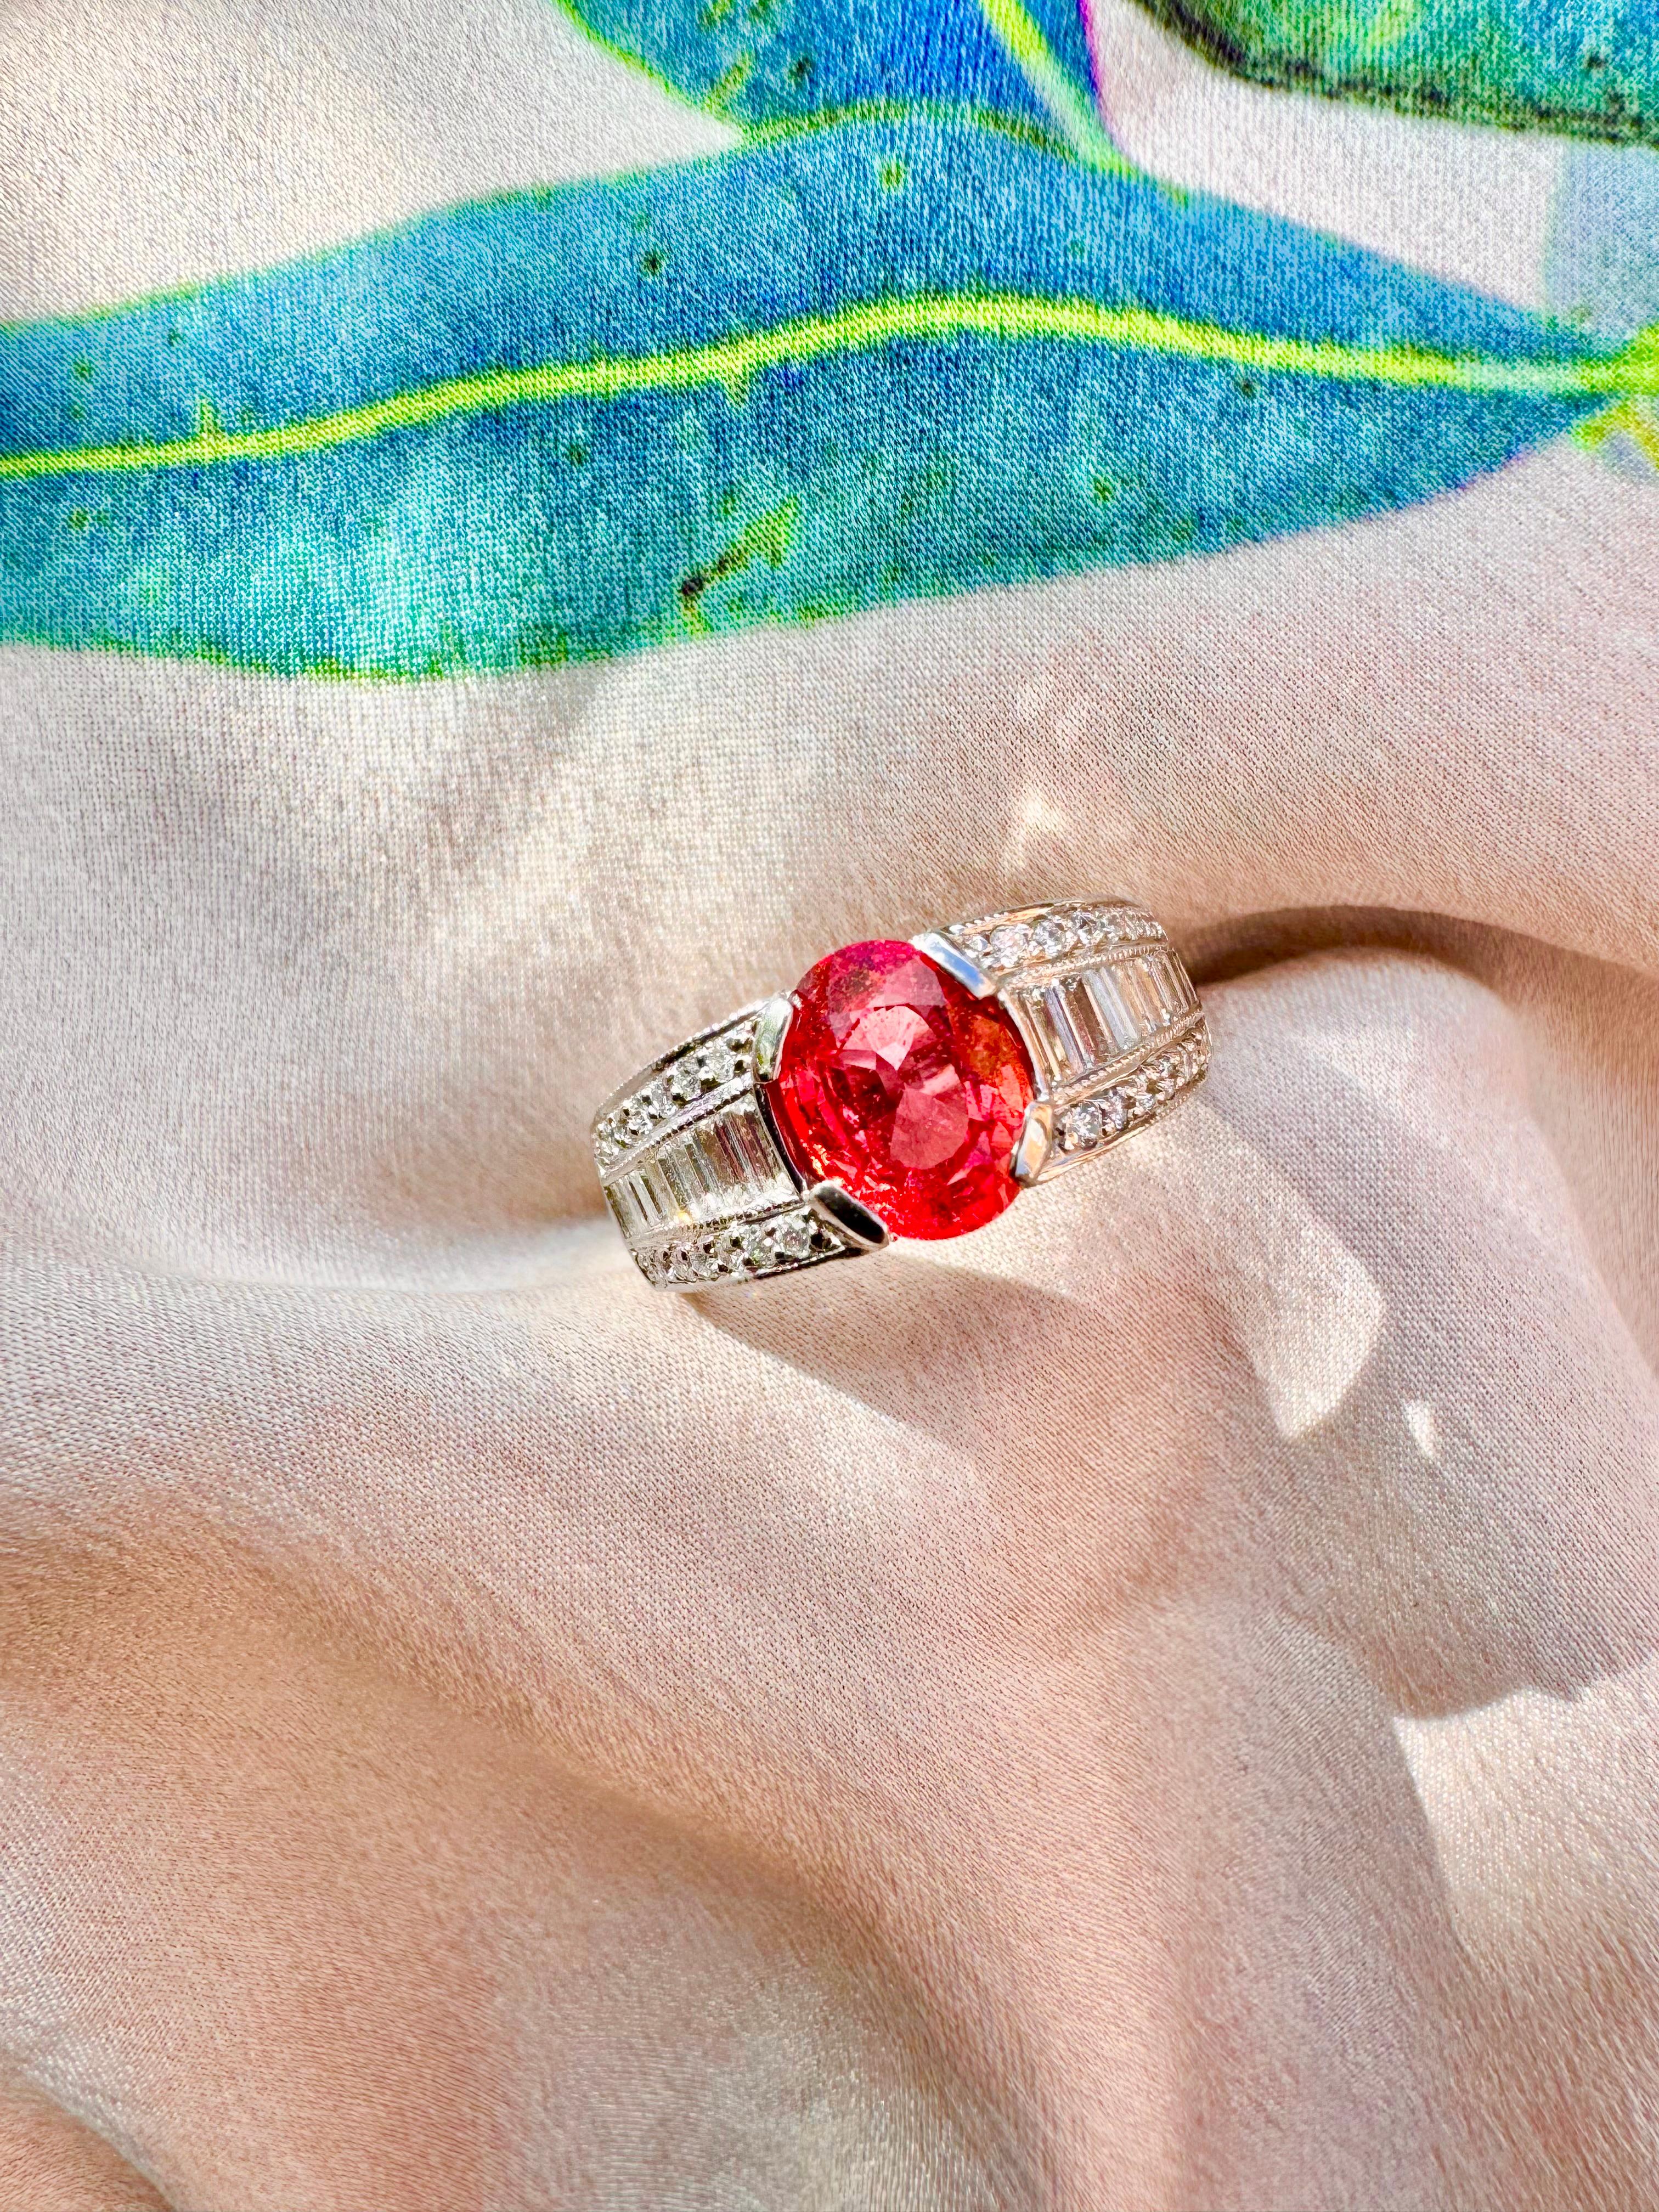 A glowing and fierily sparkling, vintage Padparadscha sapphire and diamond ring, set in a unique platinum setting. 

Specifications: 
Weight of Padparadscha: 1.88 carats
Diamond Weights: 1.04 carats 
Metal Type: Platinum 
Pre-Owned Jewelry